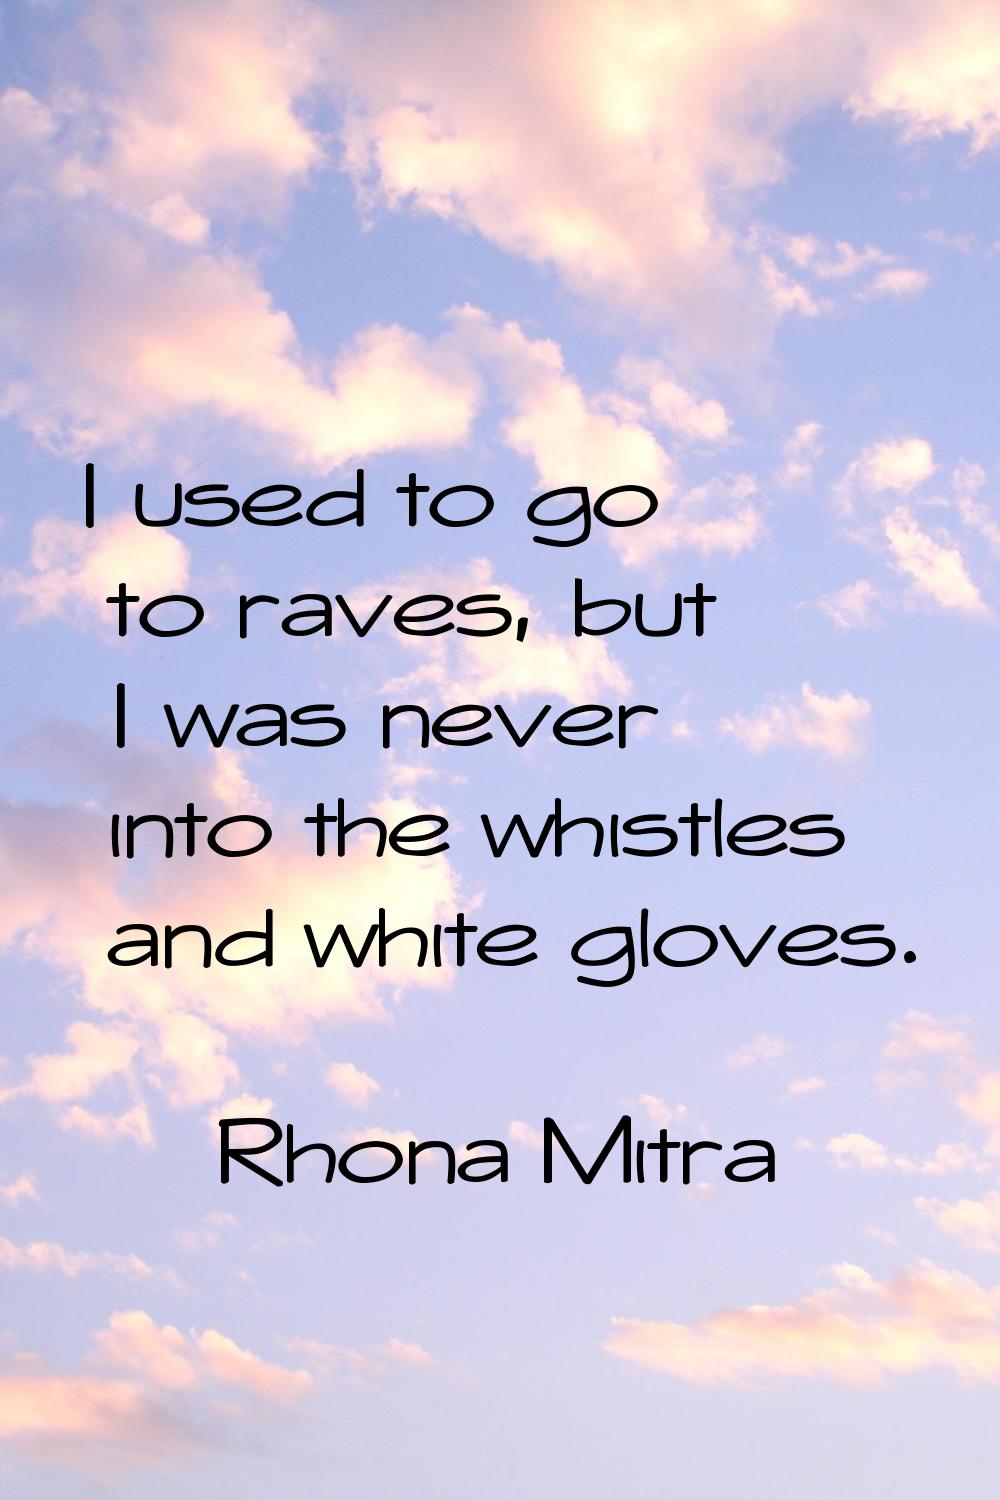 I used to go to raves, but I was never into the whistles and white gloves.